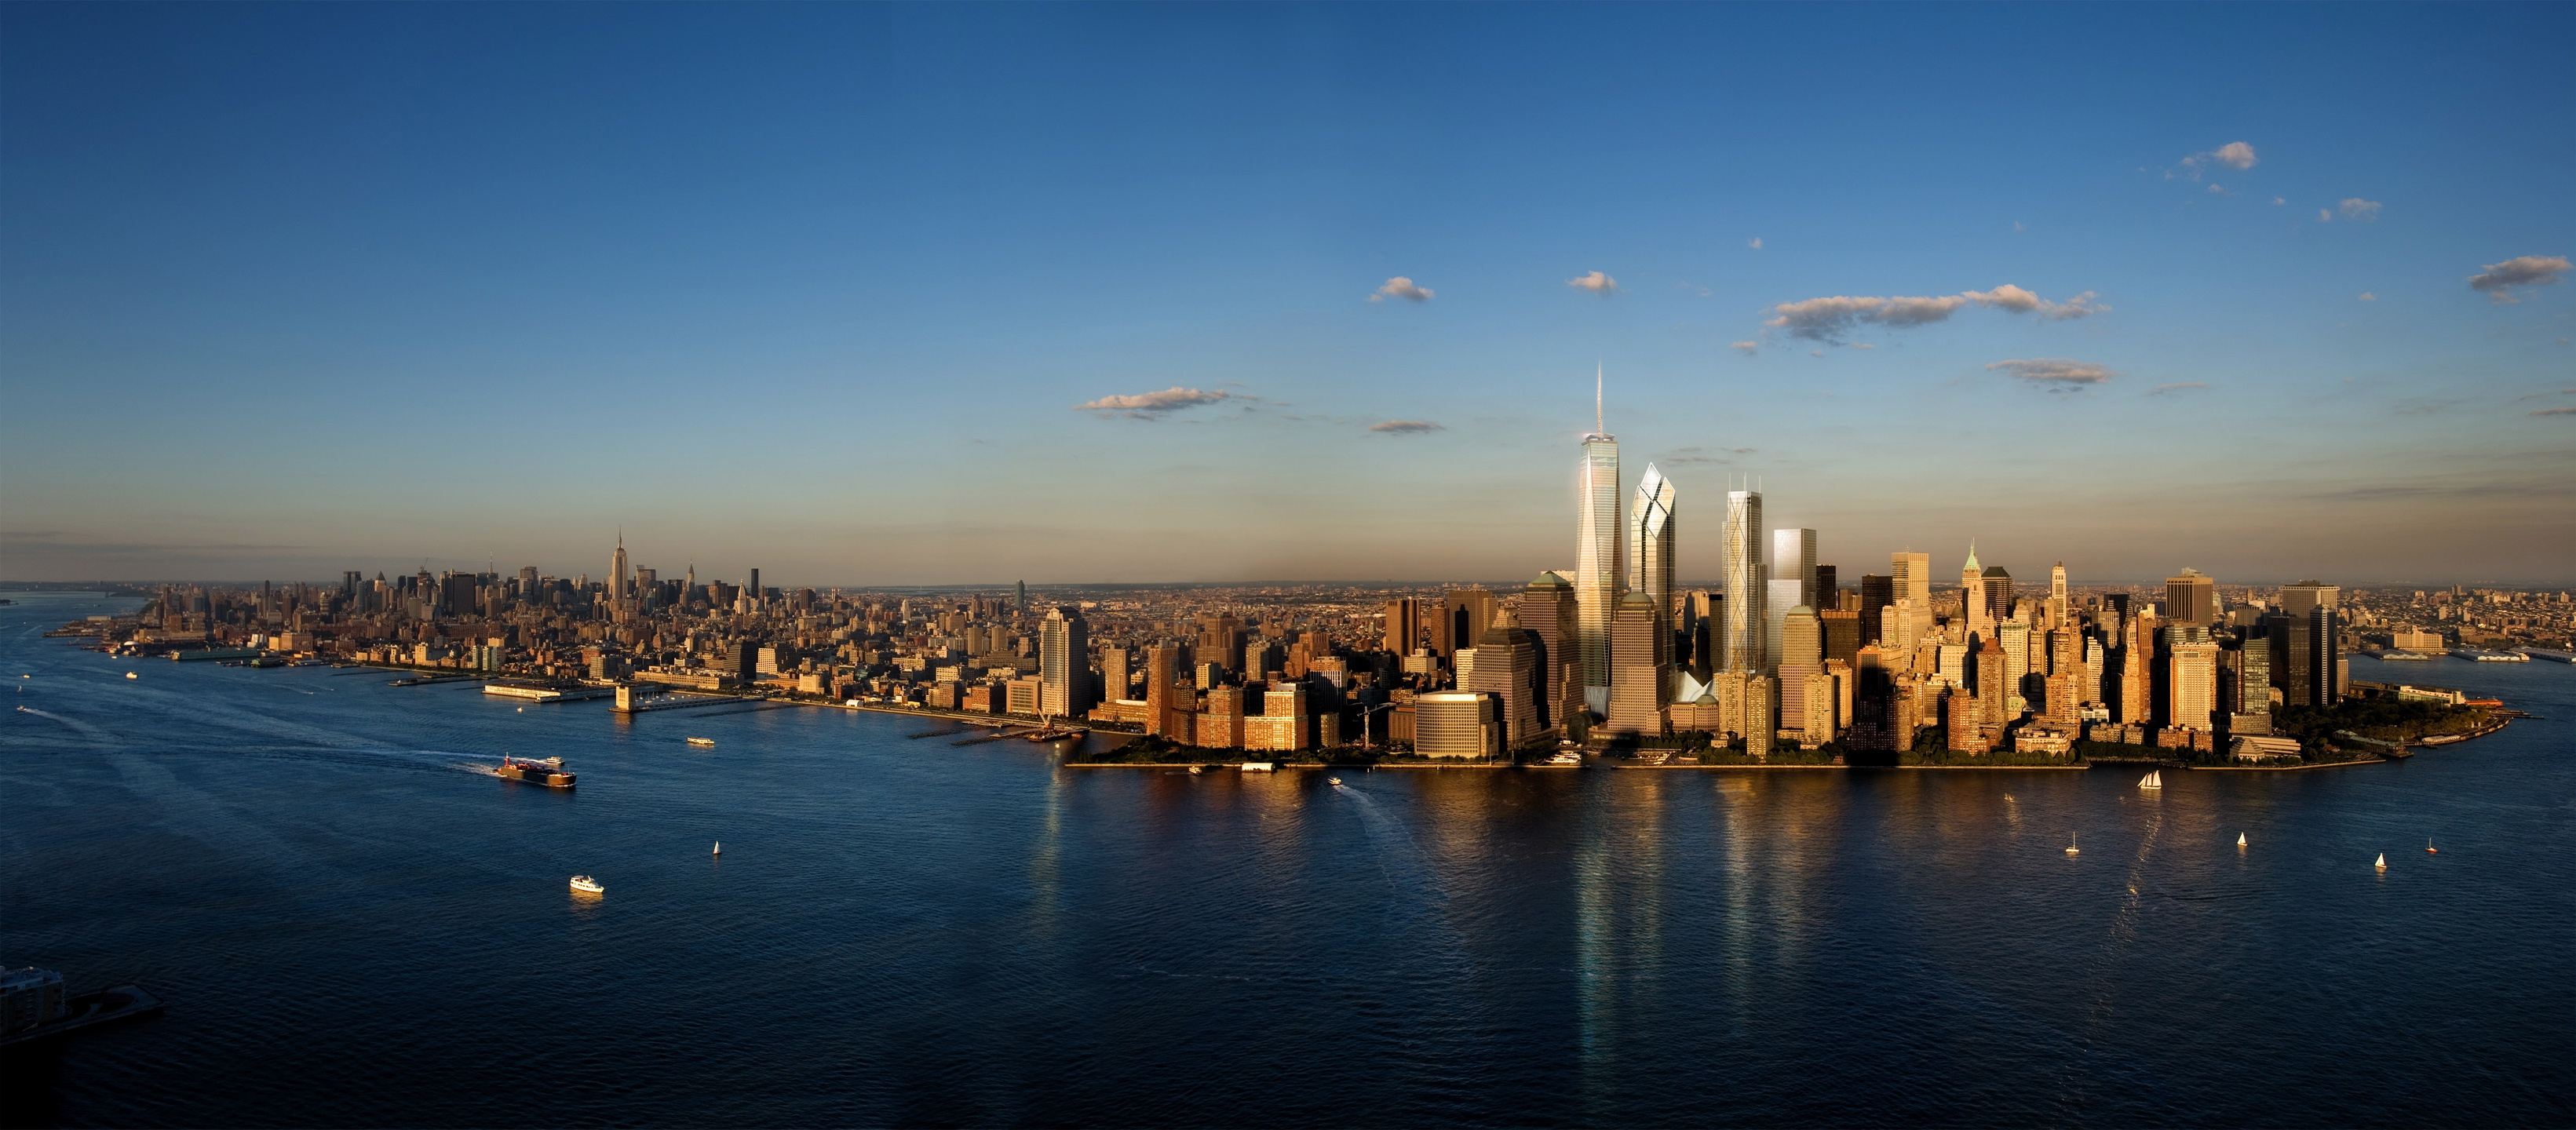 Skyline: The Island of Manhattan, Central business district of New York, One World Trade Center. 3290x1440 Dual Screen Wallpaper.